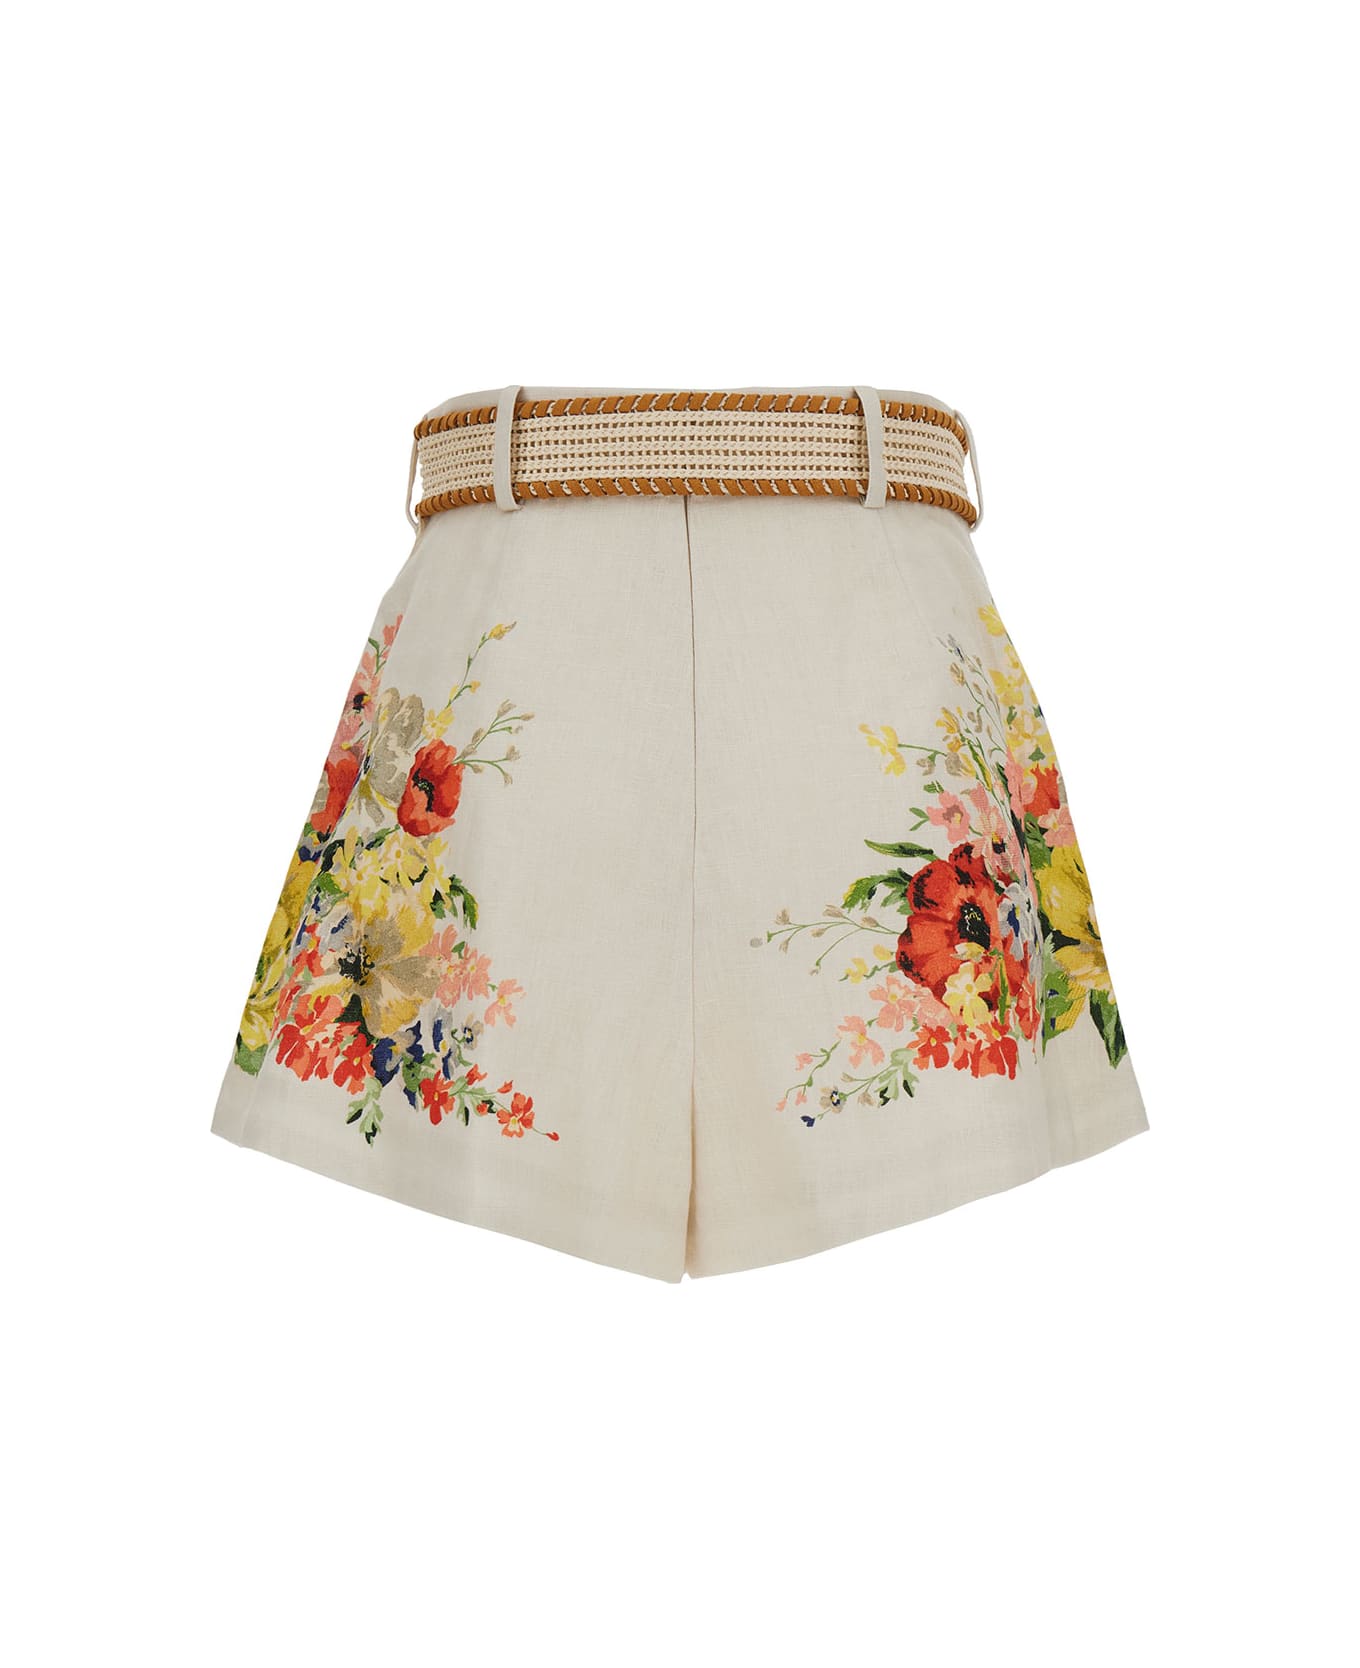 Zimmermann White Shorts With Floreal Print And Belt In Linen Woman - Multicolor ショートパンツ